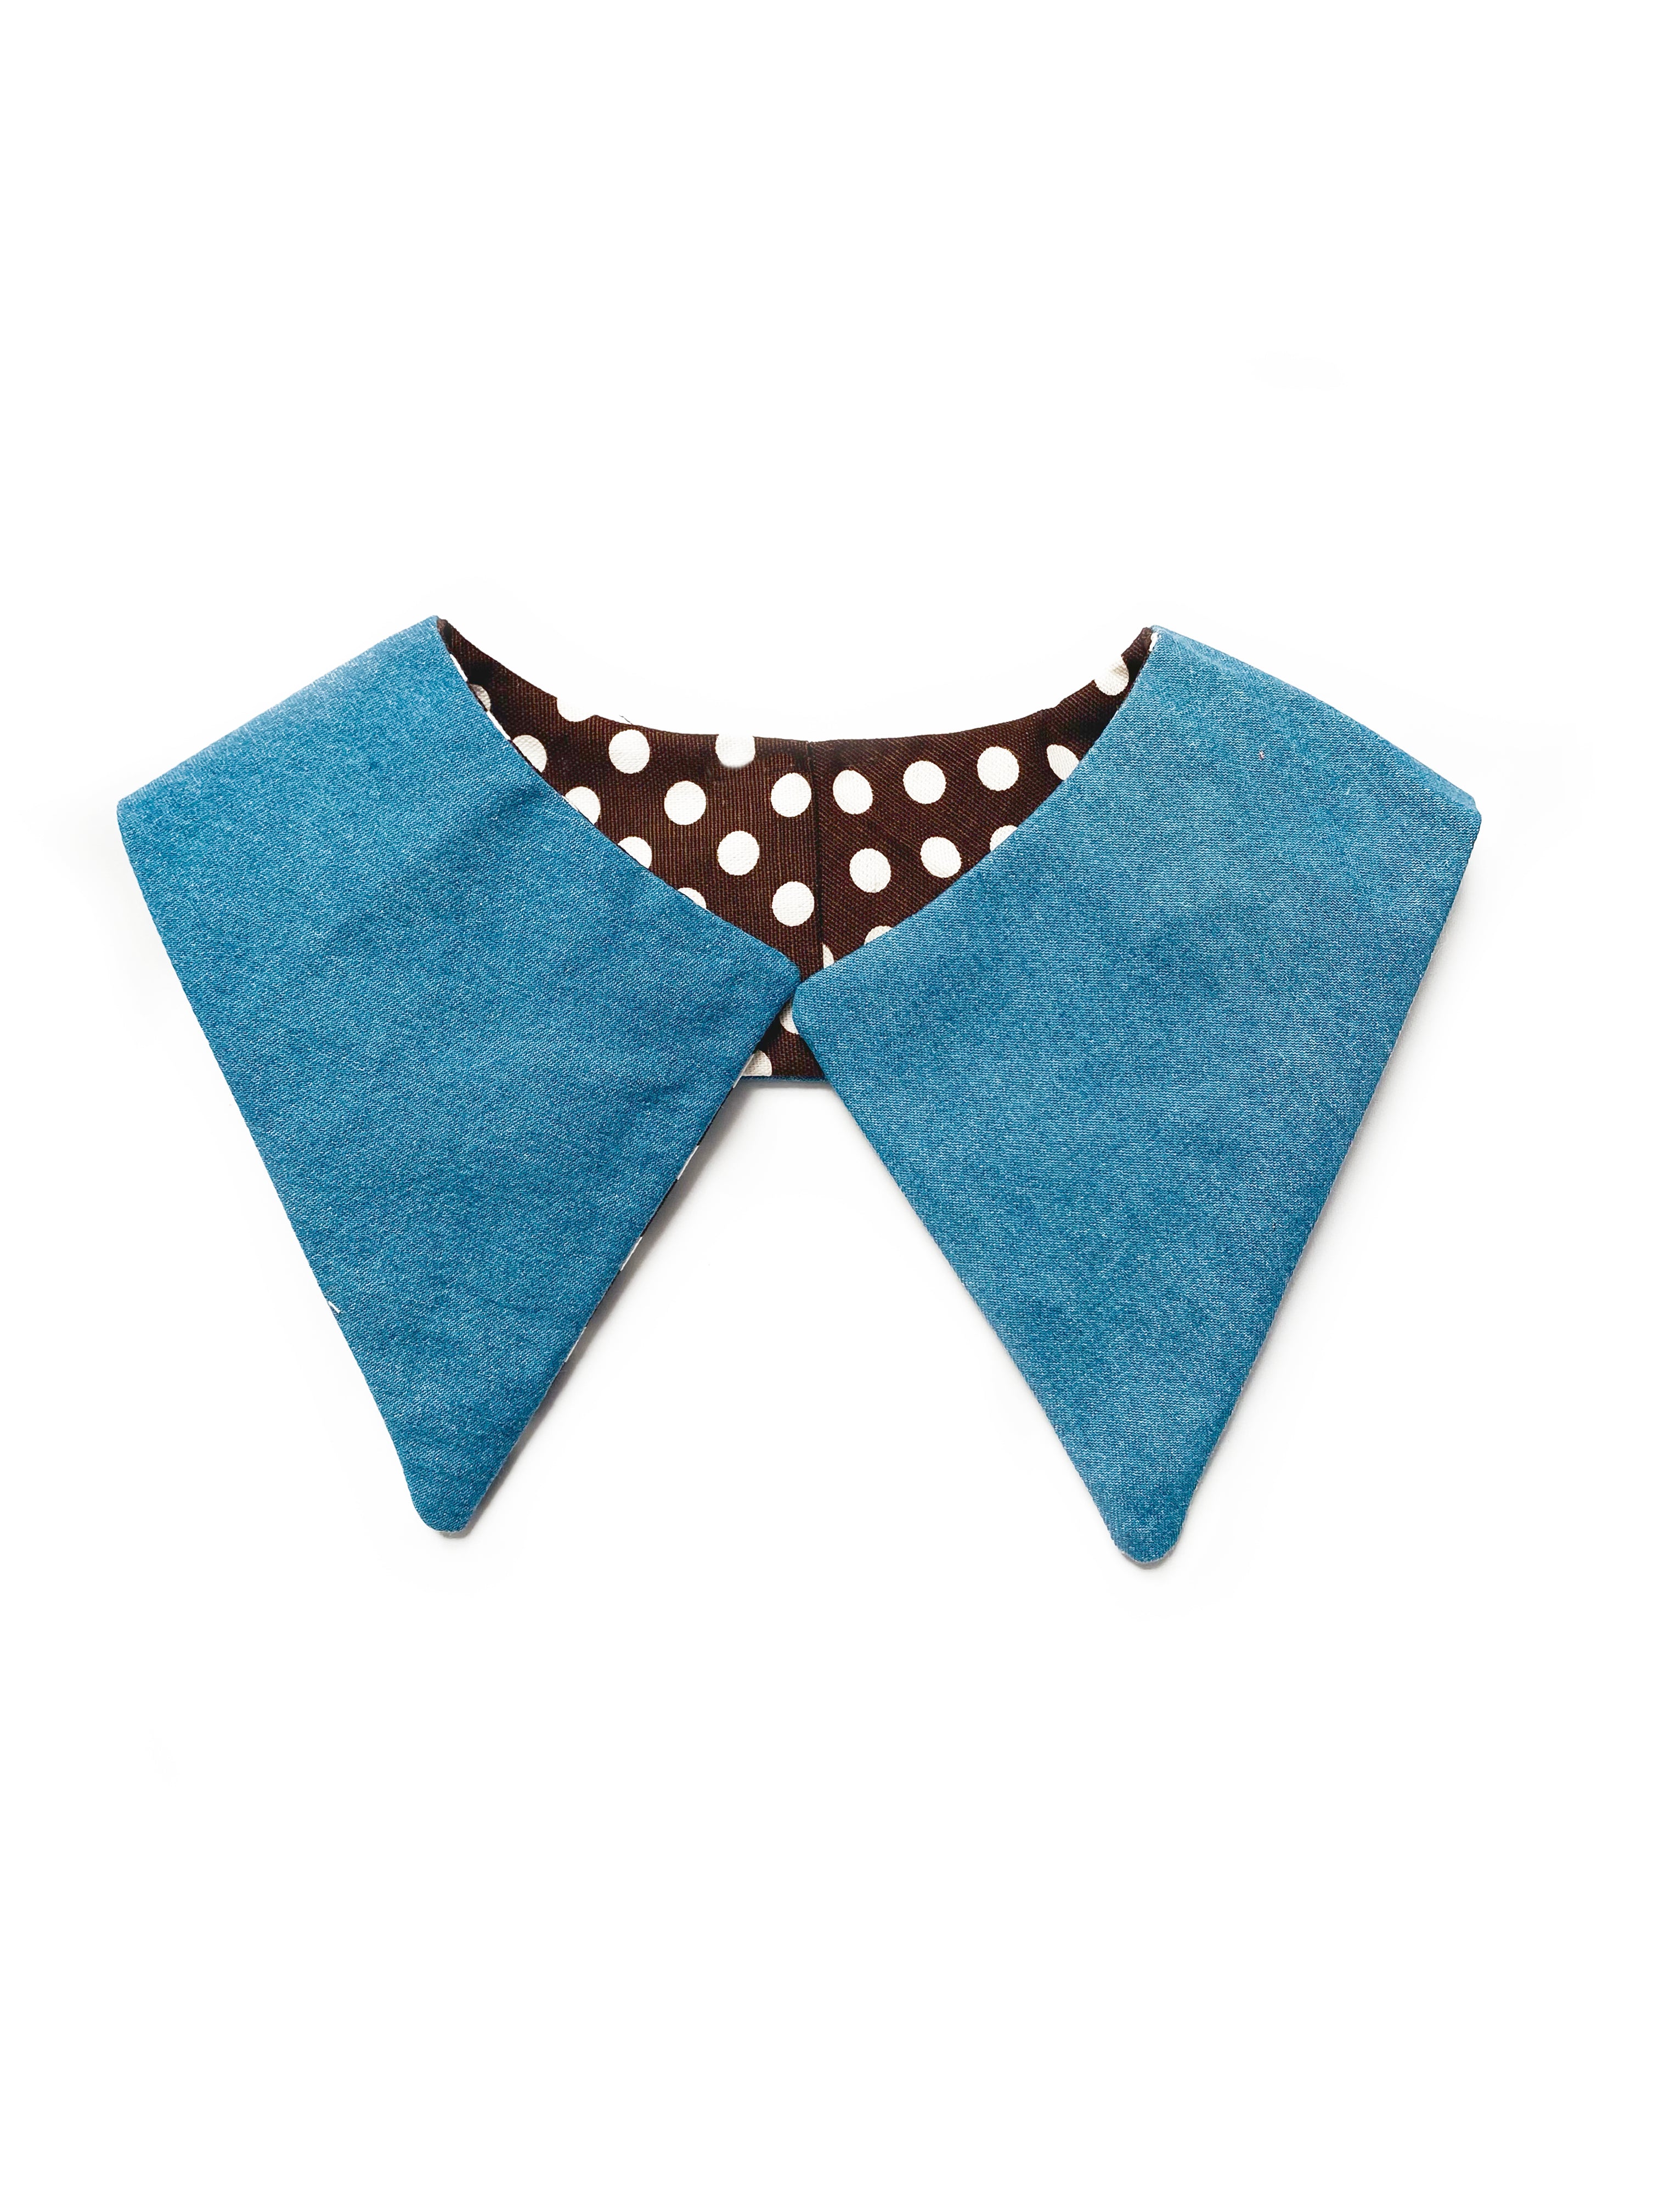 "Polka Dot Brown" Detachable Collar - Late to the Party